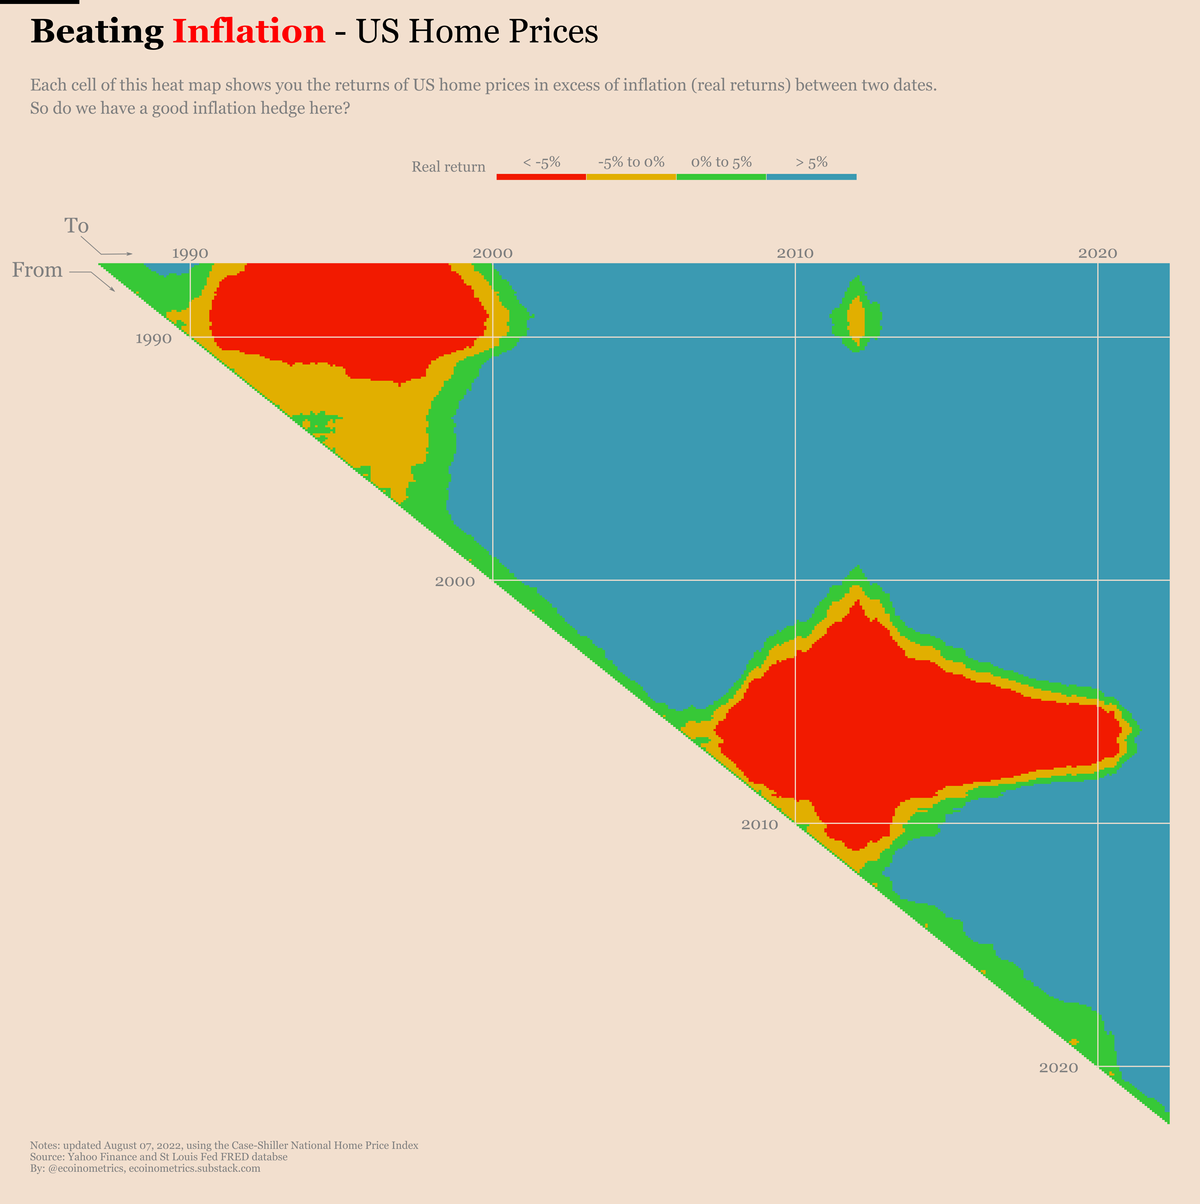 Where should you invest to beat inflation?